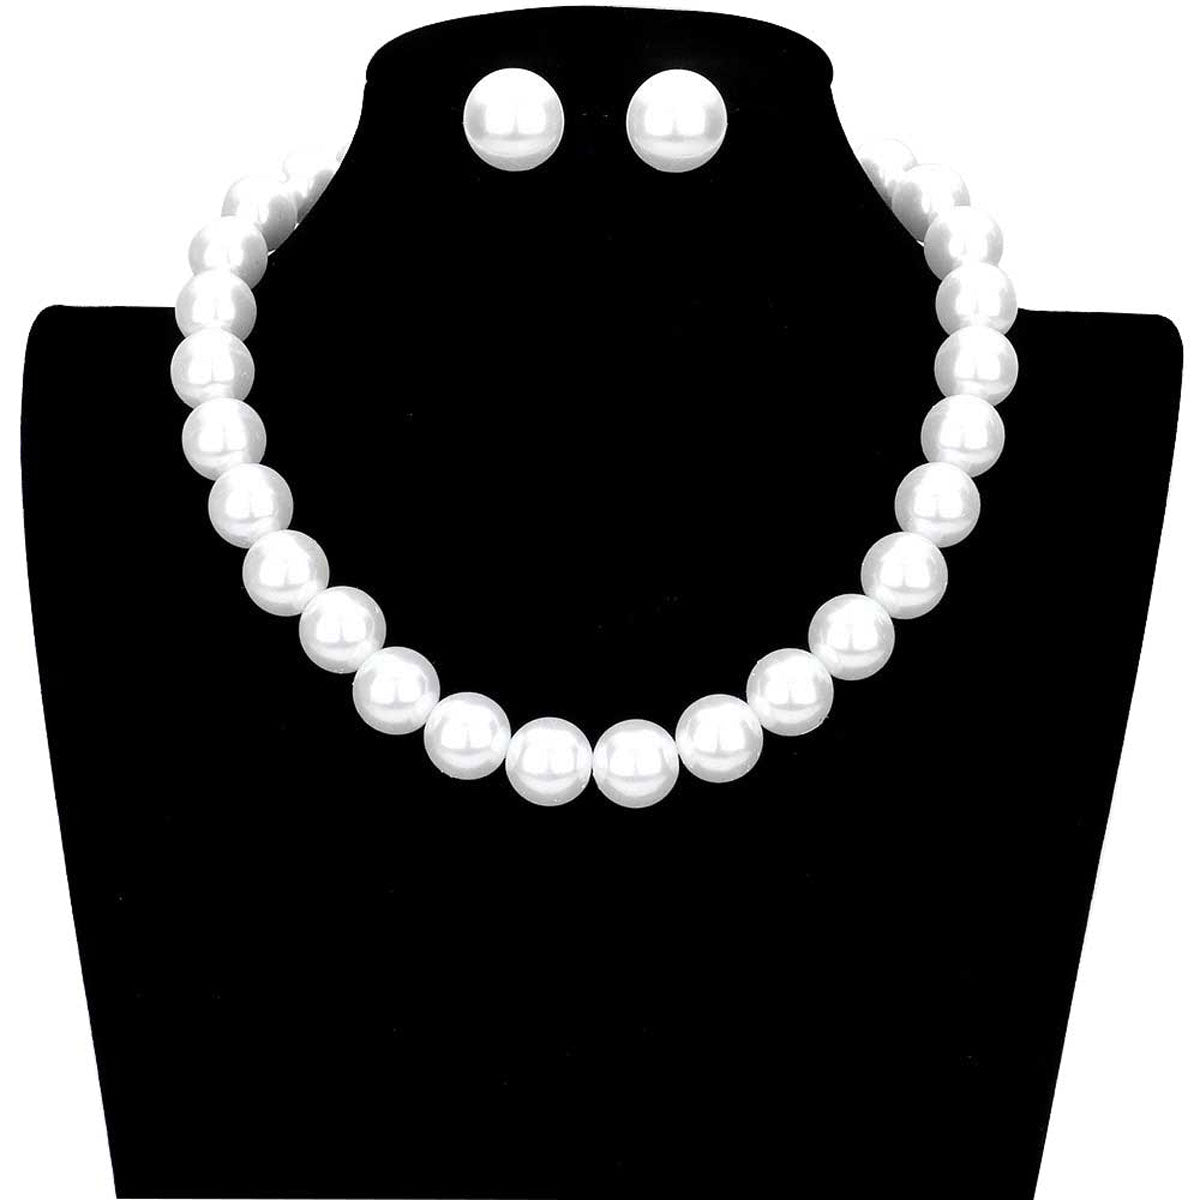 10-12mm Golden South Sea Pearl Necklace - AAAA Quality